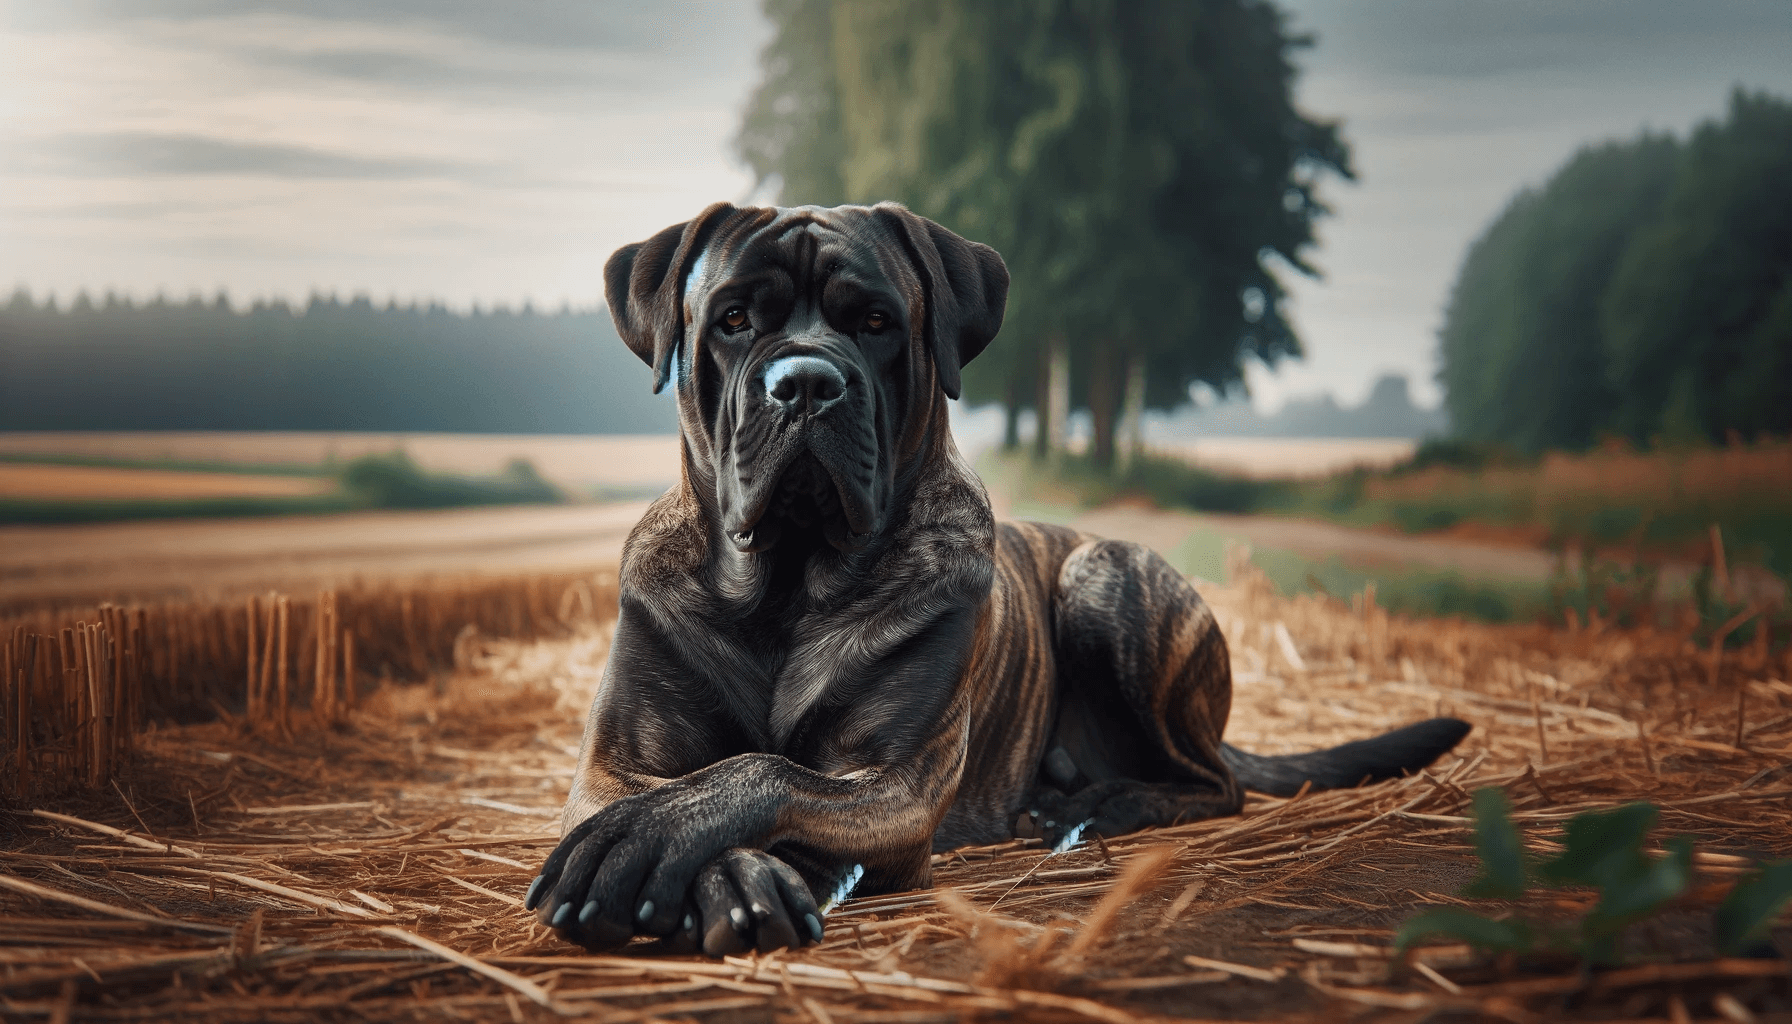 A Brindle Cane Corso dog peacefully lying down with its front paws crossed in a rural setting, embodying relaxation and tranquility.